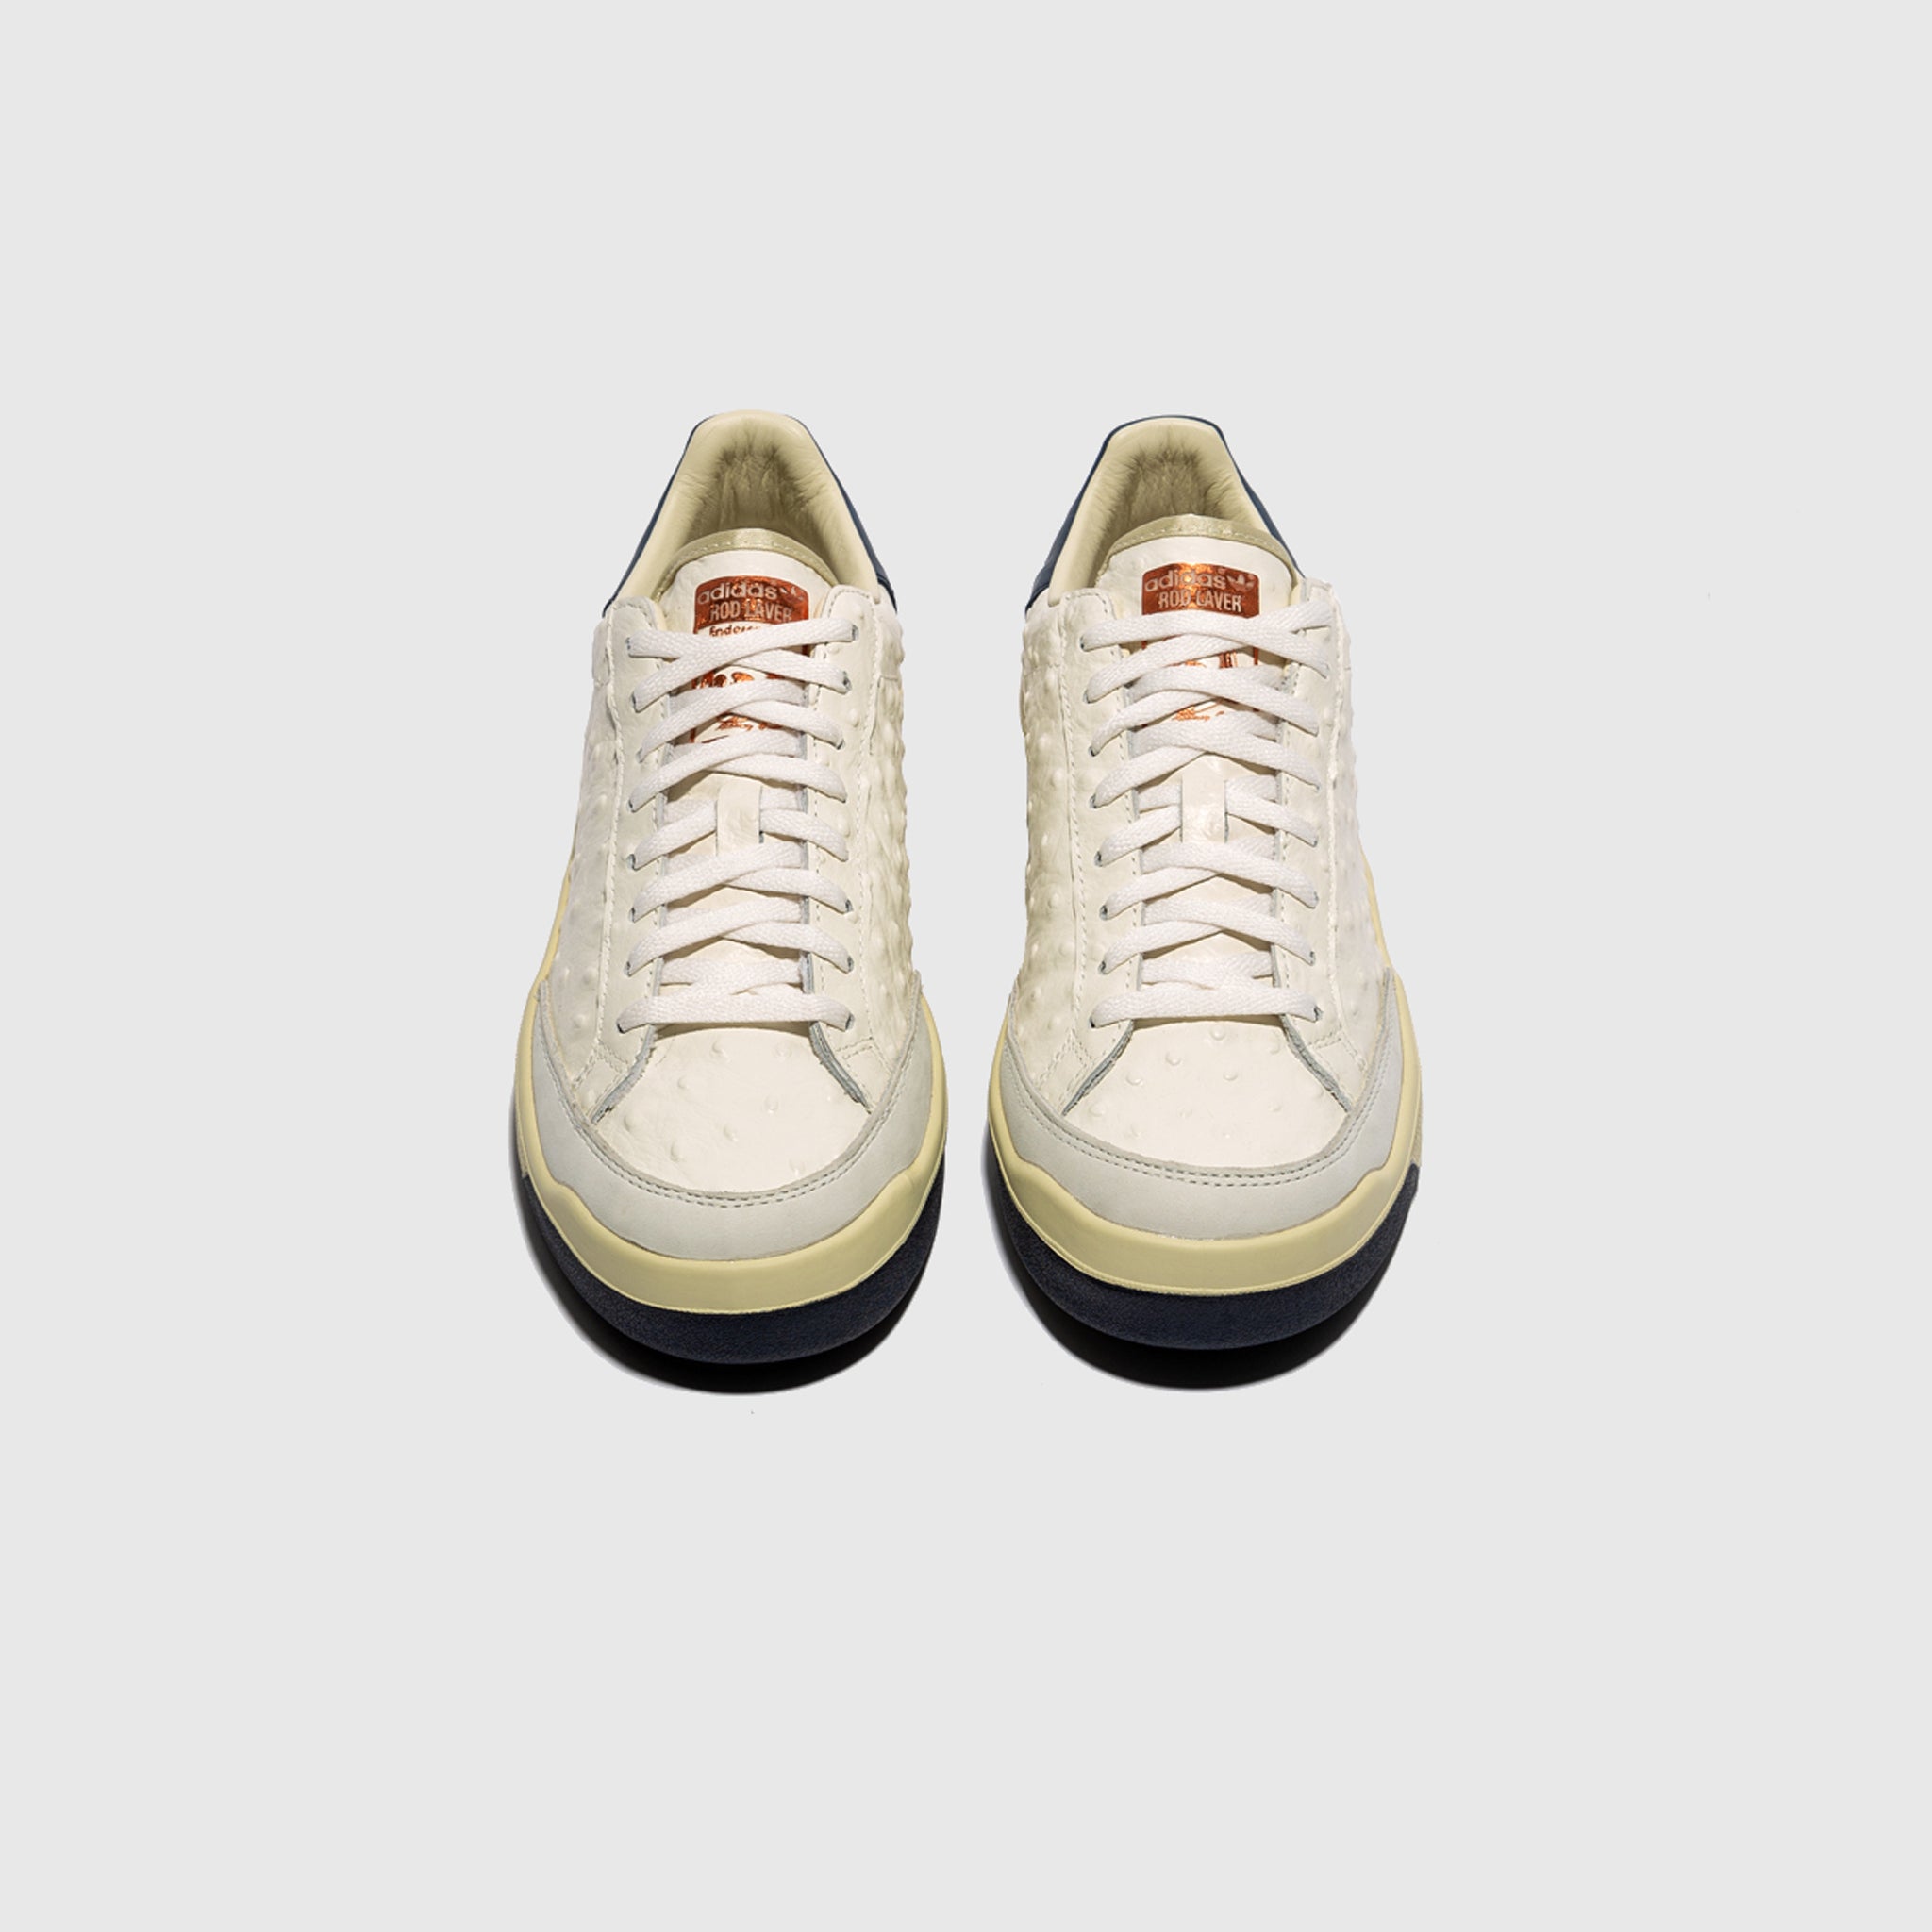 ROD LAVER "LEATHER PACK" (OSTRICH)